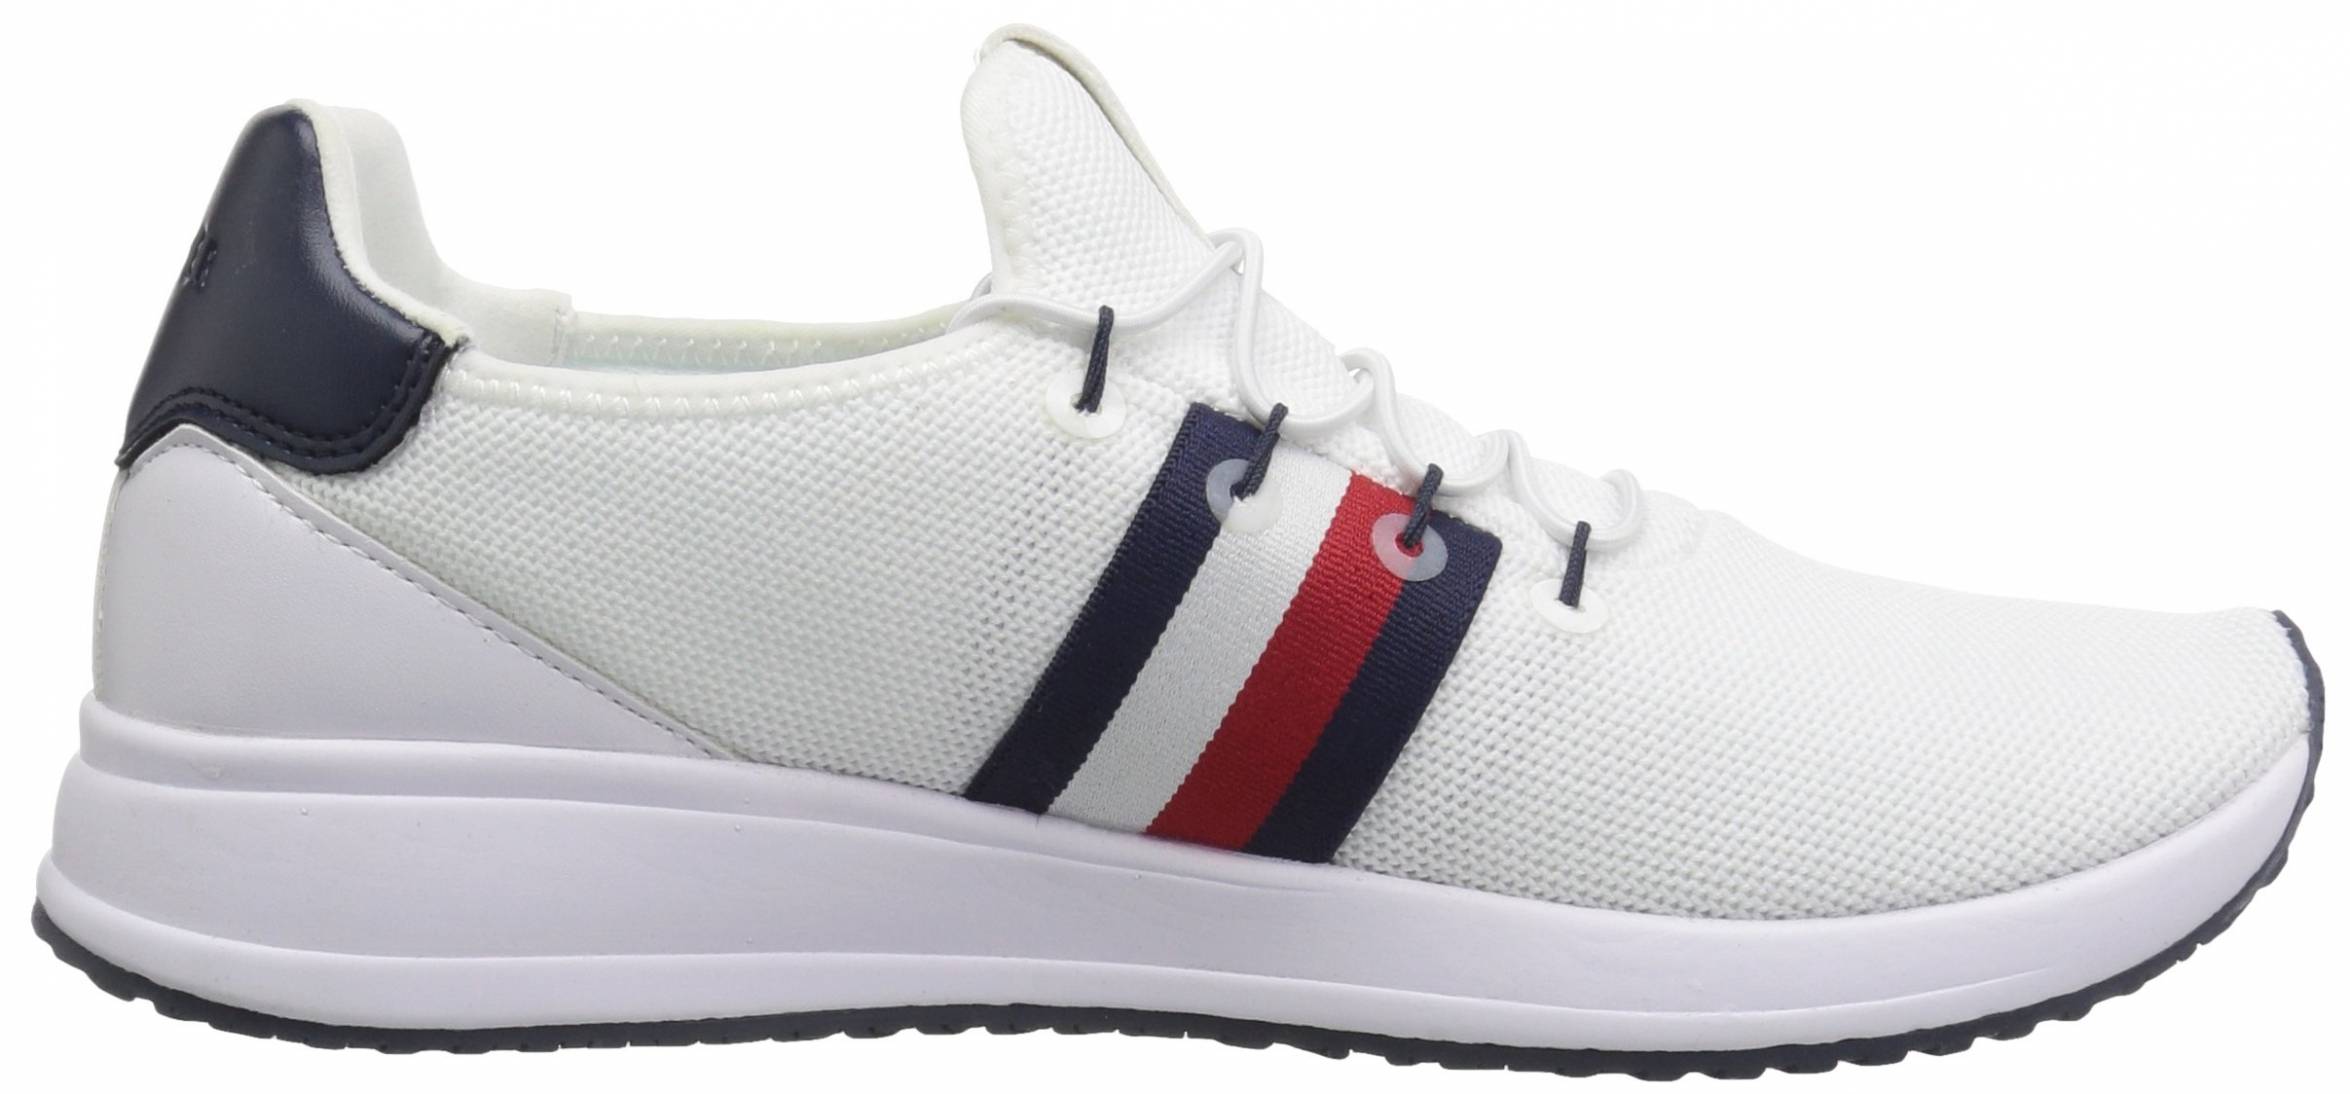 tommy hilfiger red sneakers